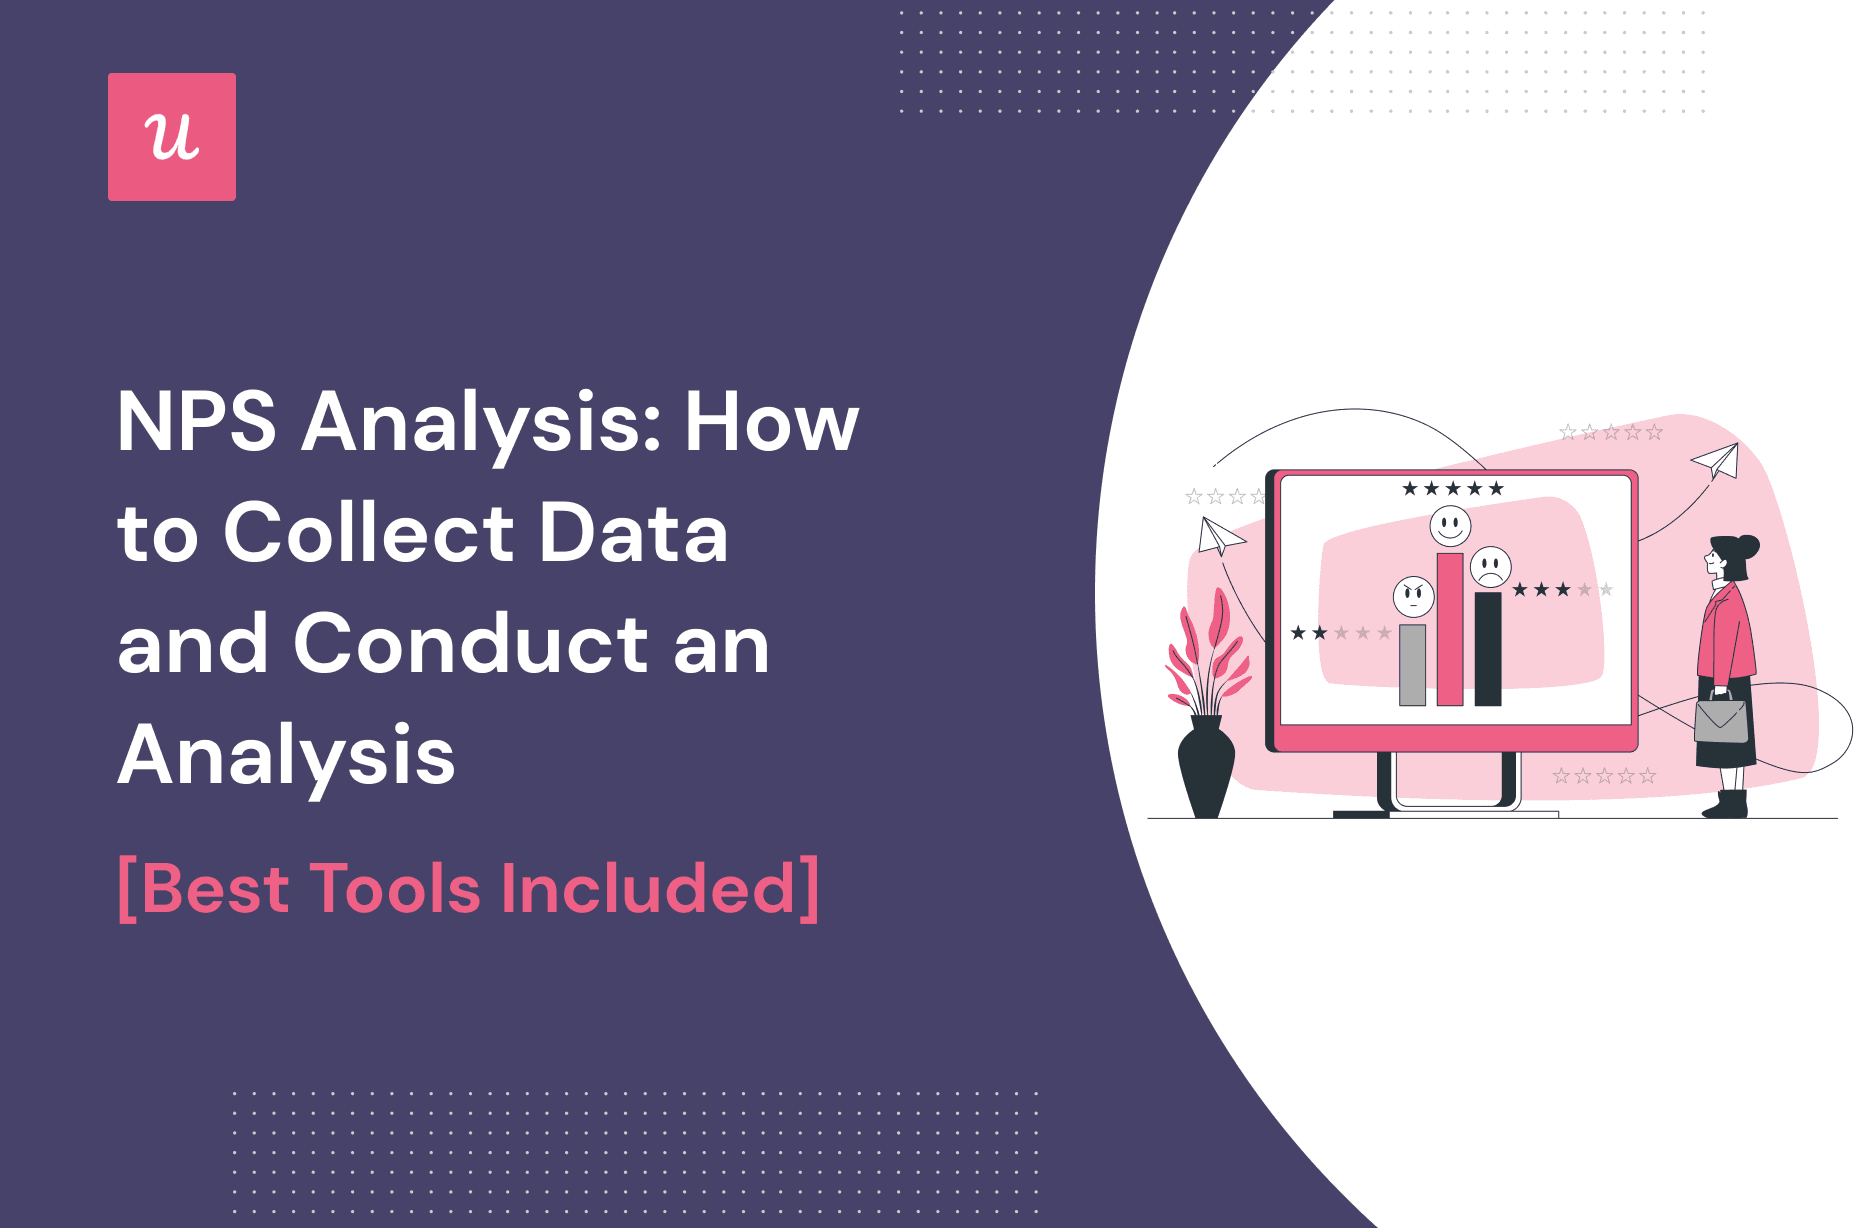 NPS Analysis: How To Collect Data and Conduct an Analysis [Best Tools Included] cover